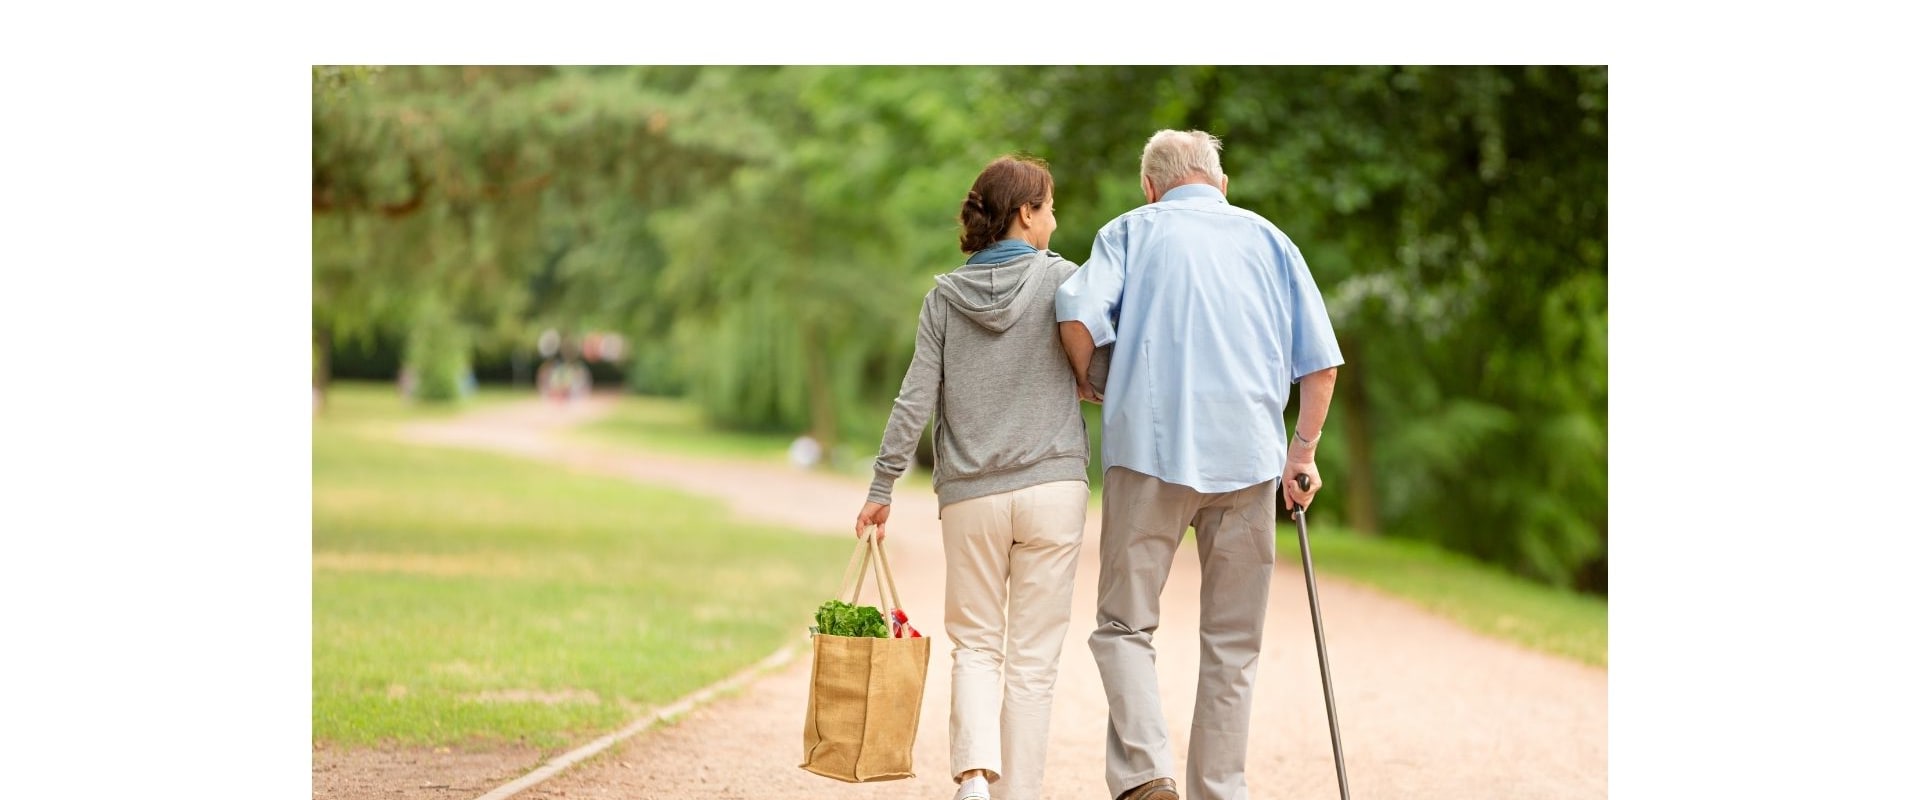 What are the skills and strength of caregiver?